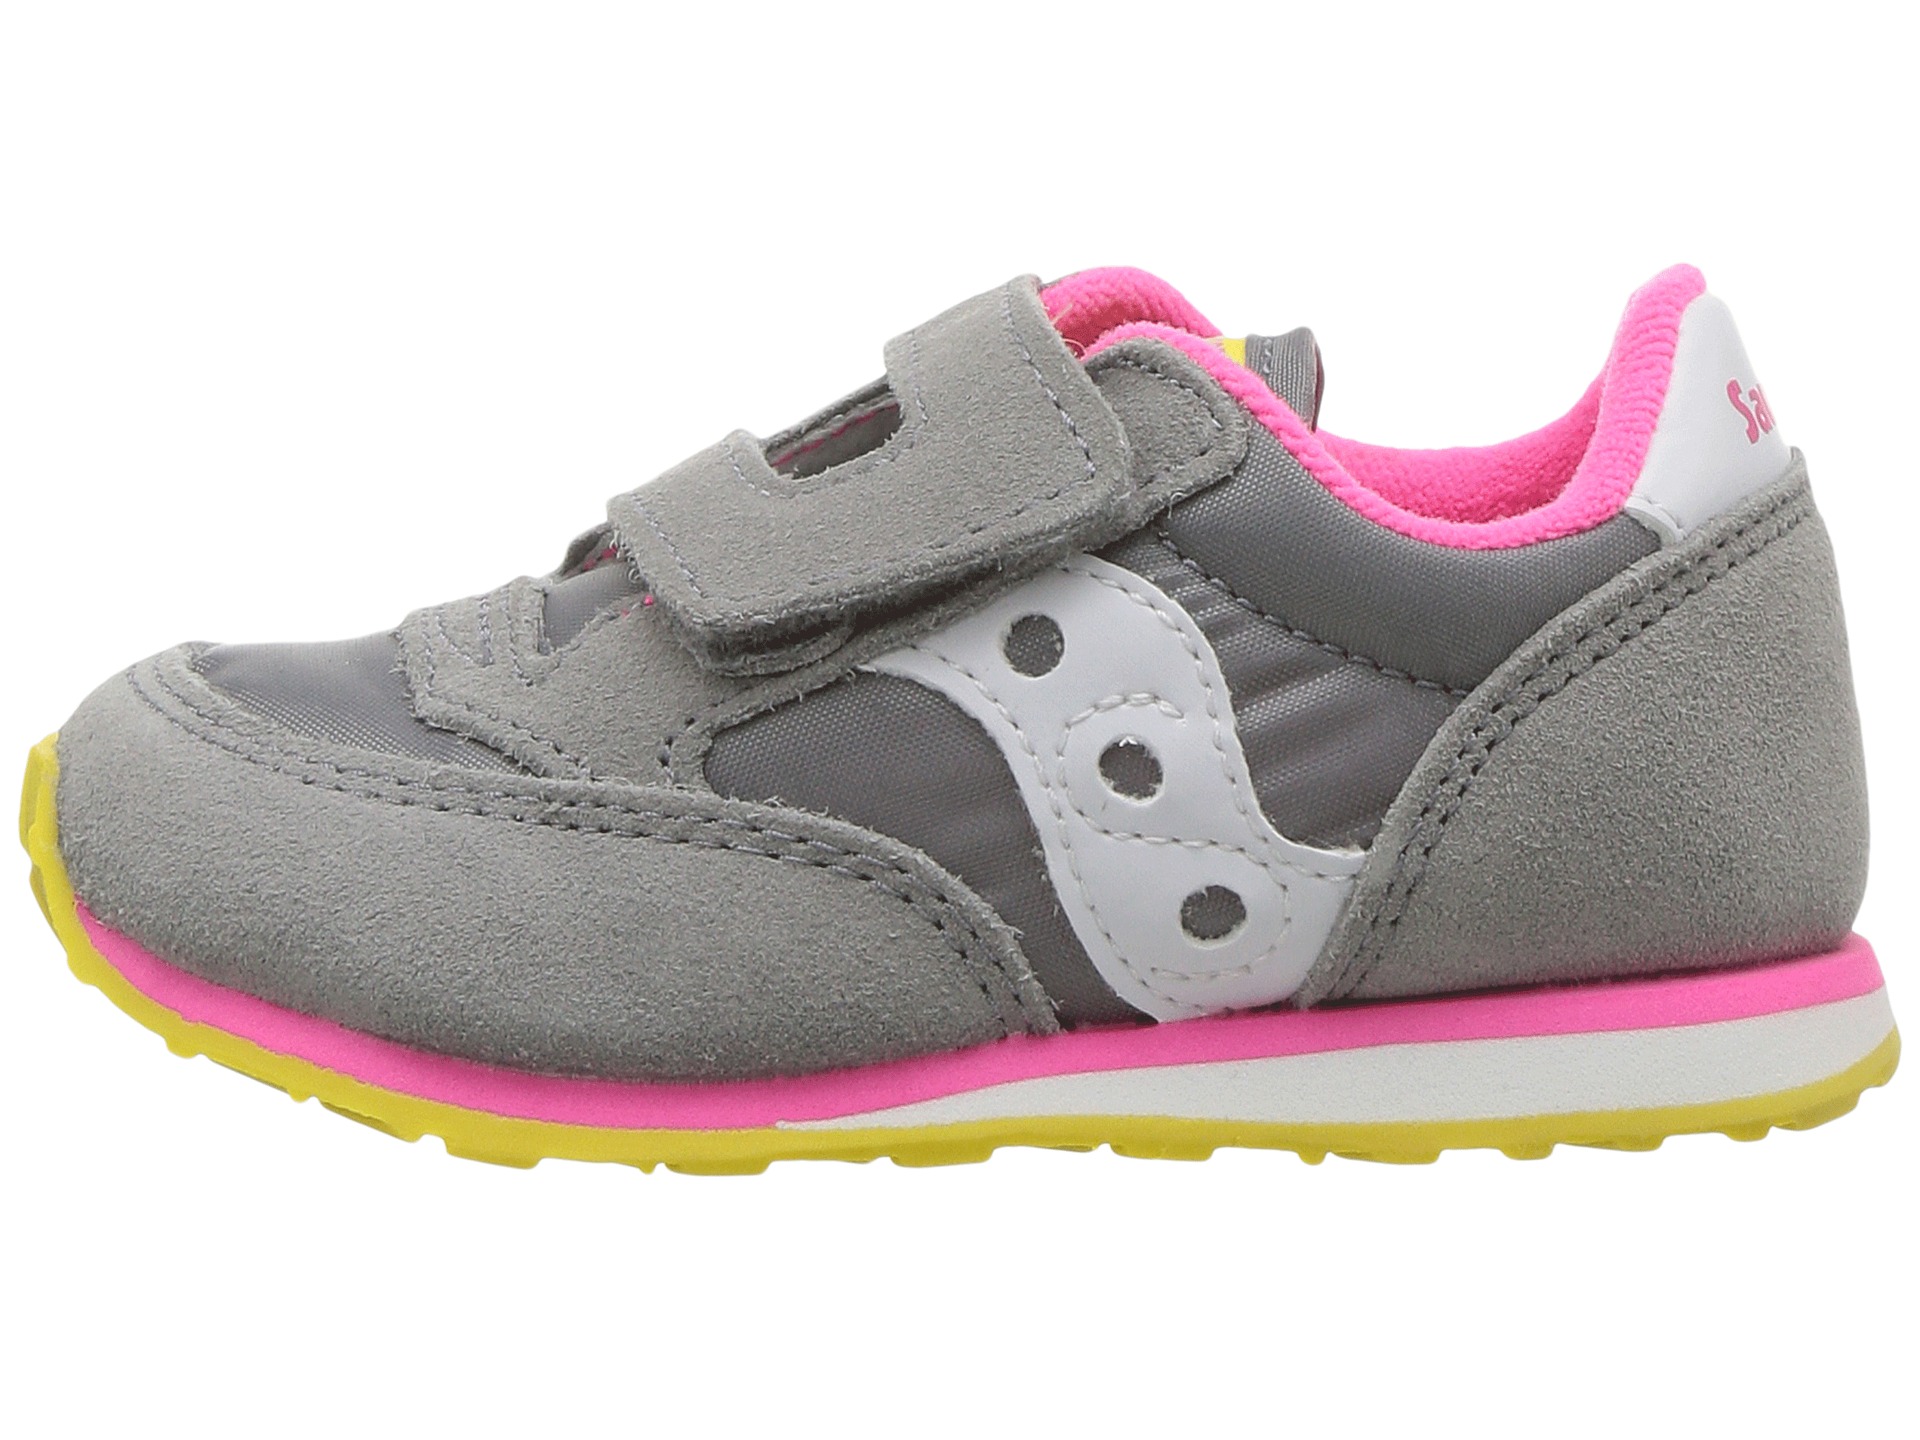 saucony toddler shoes